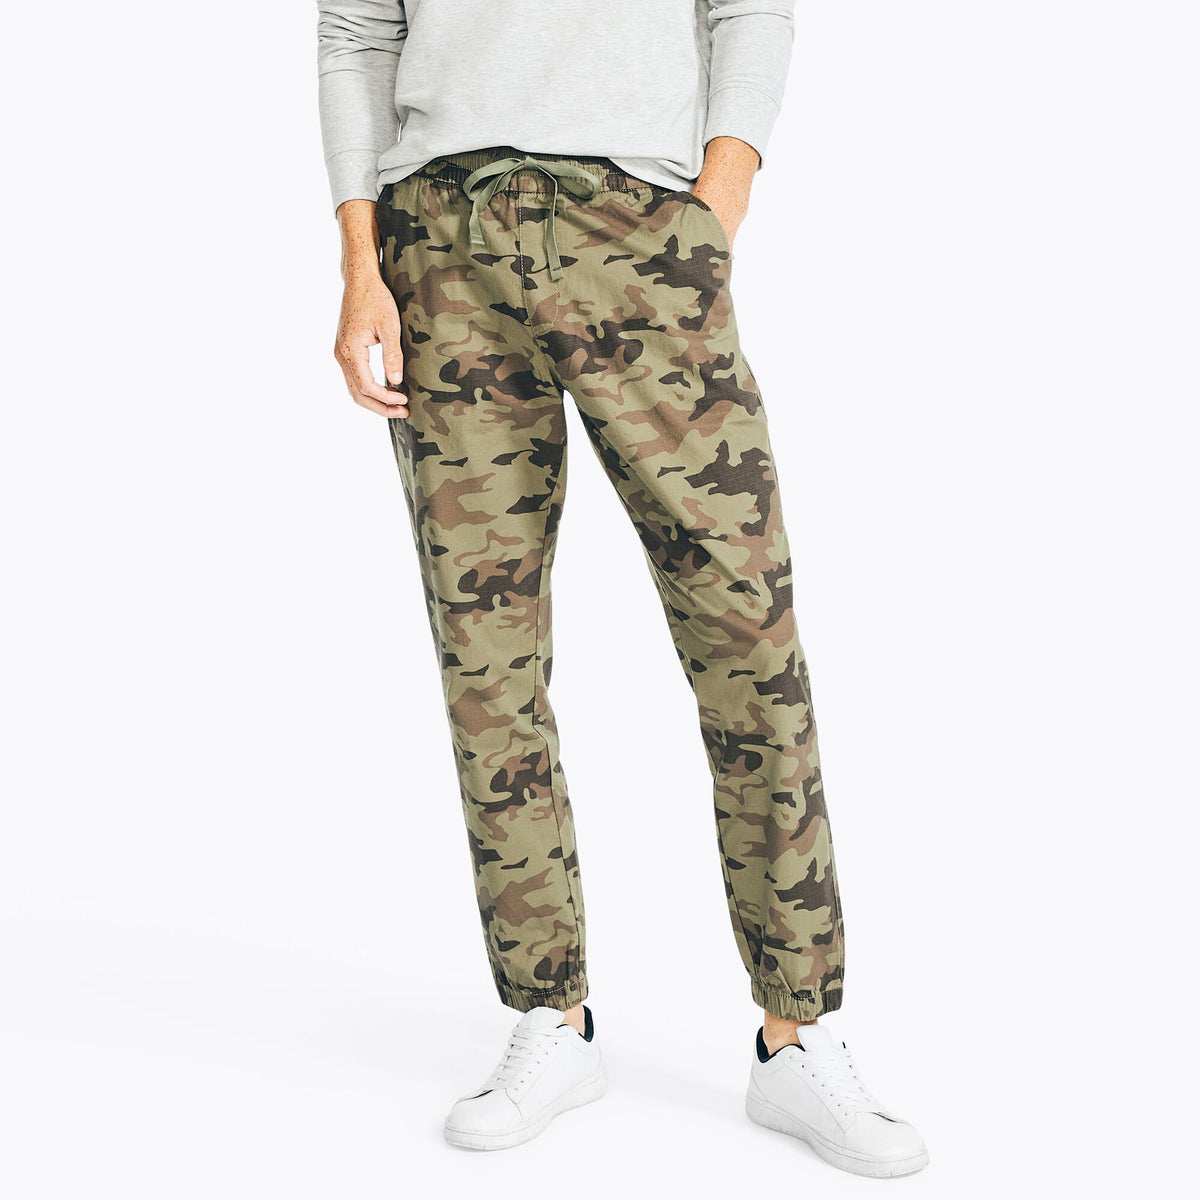 Nautica Men's Slim Fit Ripstop Camouflage Jogger Teal Wave